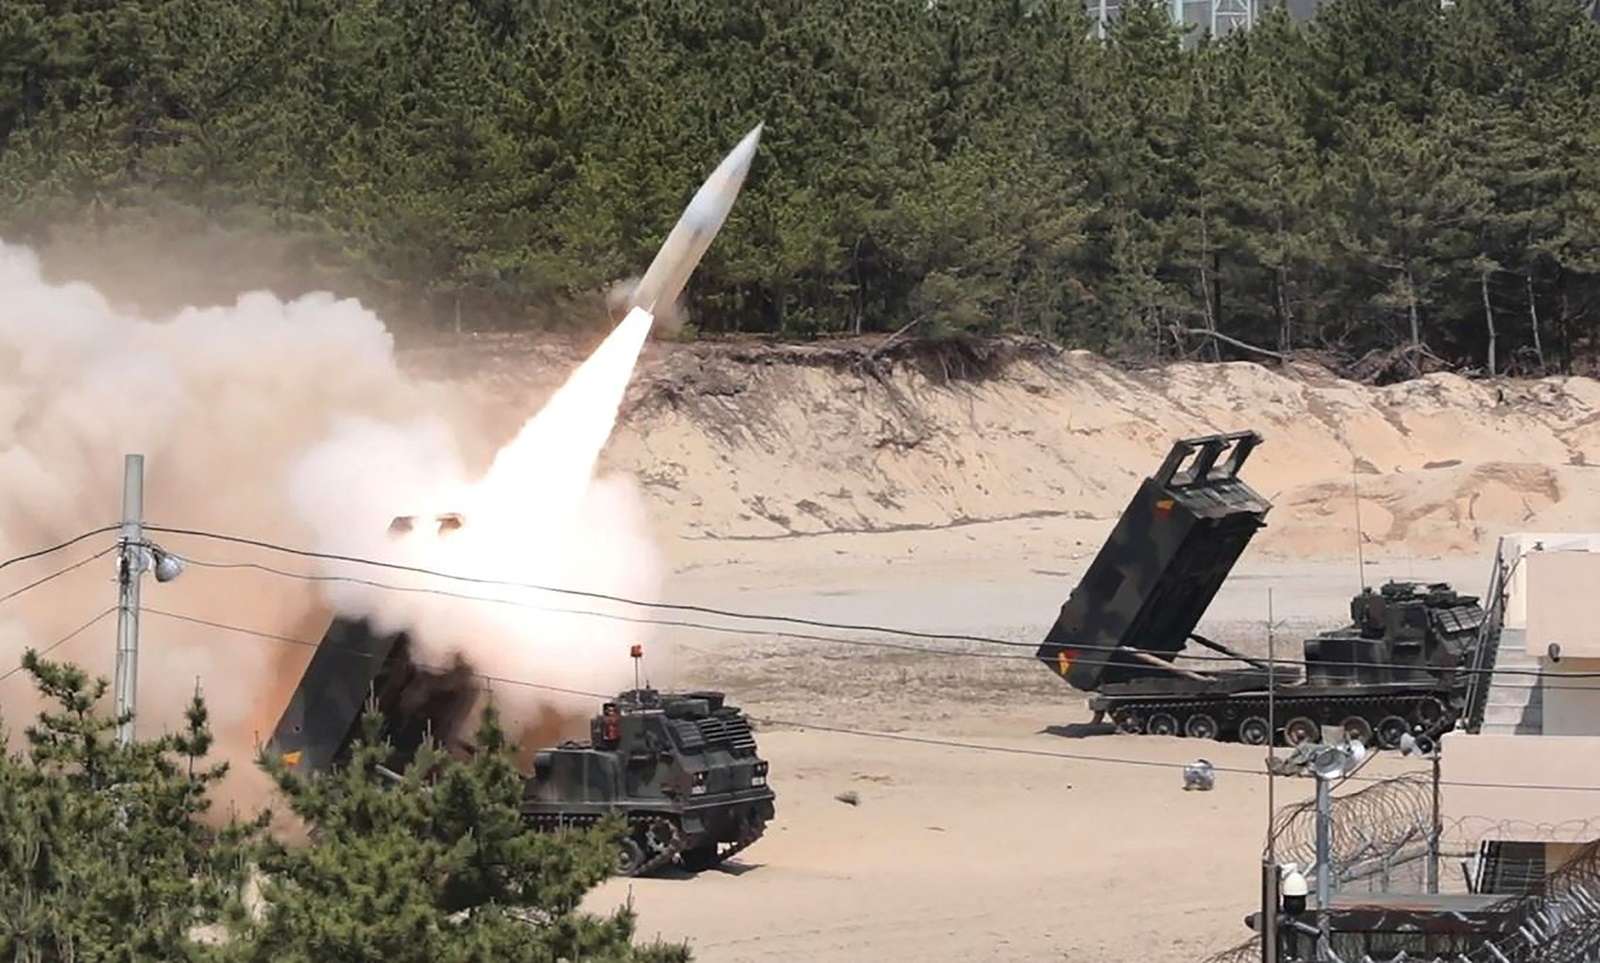 This handout photo taken on May 25, 2022 and provided by the South Korean Defence Ministry in Seoul shows a US Army Tactical Missile System (ATACMS) firing a missile from an undisclosed location on South Korea's east coast during a live-fire exercise aimed to counter North Korea’s missile test. North Korea fired a volley of missiles early on May 25, including a suspected intercontinental ballistic missile, just hours after US President Joe Biden left Asia after a trip overshadowed by Pyongyang's sabre-rattling.,Image: 694333097, License: Rights-managed, Restrictions: ---- EDITORS NOTE ----- RESTRICTED TO EDITORIAL USE - MANDATORY CREDIT "AFP PHOTO / South Korean Defence Ministry" - NO MARKETING NO ADVERTISING CAMPAIGNS - DISTRIBUTED AS A SERVICE TO CLIENTS, ***
HANDOUT image or SOCIAL MEDIA IMAGE or FILMSTILL for EDITORIAL USE ONLY! * Please note: Fees charged by Profimedia are for the Profimedia's services only, and do not, nor are they intended to, convey to the user any ownership of Copyright or License in the material. Profimedia does not claim any ownership including but not limited to Copyright or License in the attached material. By publishing this material you (the user) expressly agree to indemnify and to hold Profimedia and its directors, shareholders and employees harmless from any loss, claims, damages, demands, expenses (including legal fees), or any causes of action or allegation against Profimedia arising out of or connected in any way with publication of the material. Profimedia does not claim any copyright or license in the attached materials. Any downloading fees charged by Profimedia are for Profimedia's services only. * Handling Fee Only 
***, Model Release: no, Credit line: Handout / AFP / Profimedia